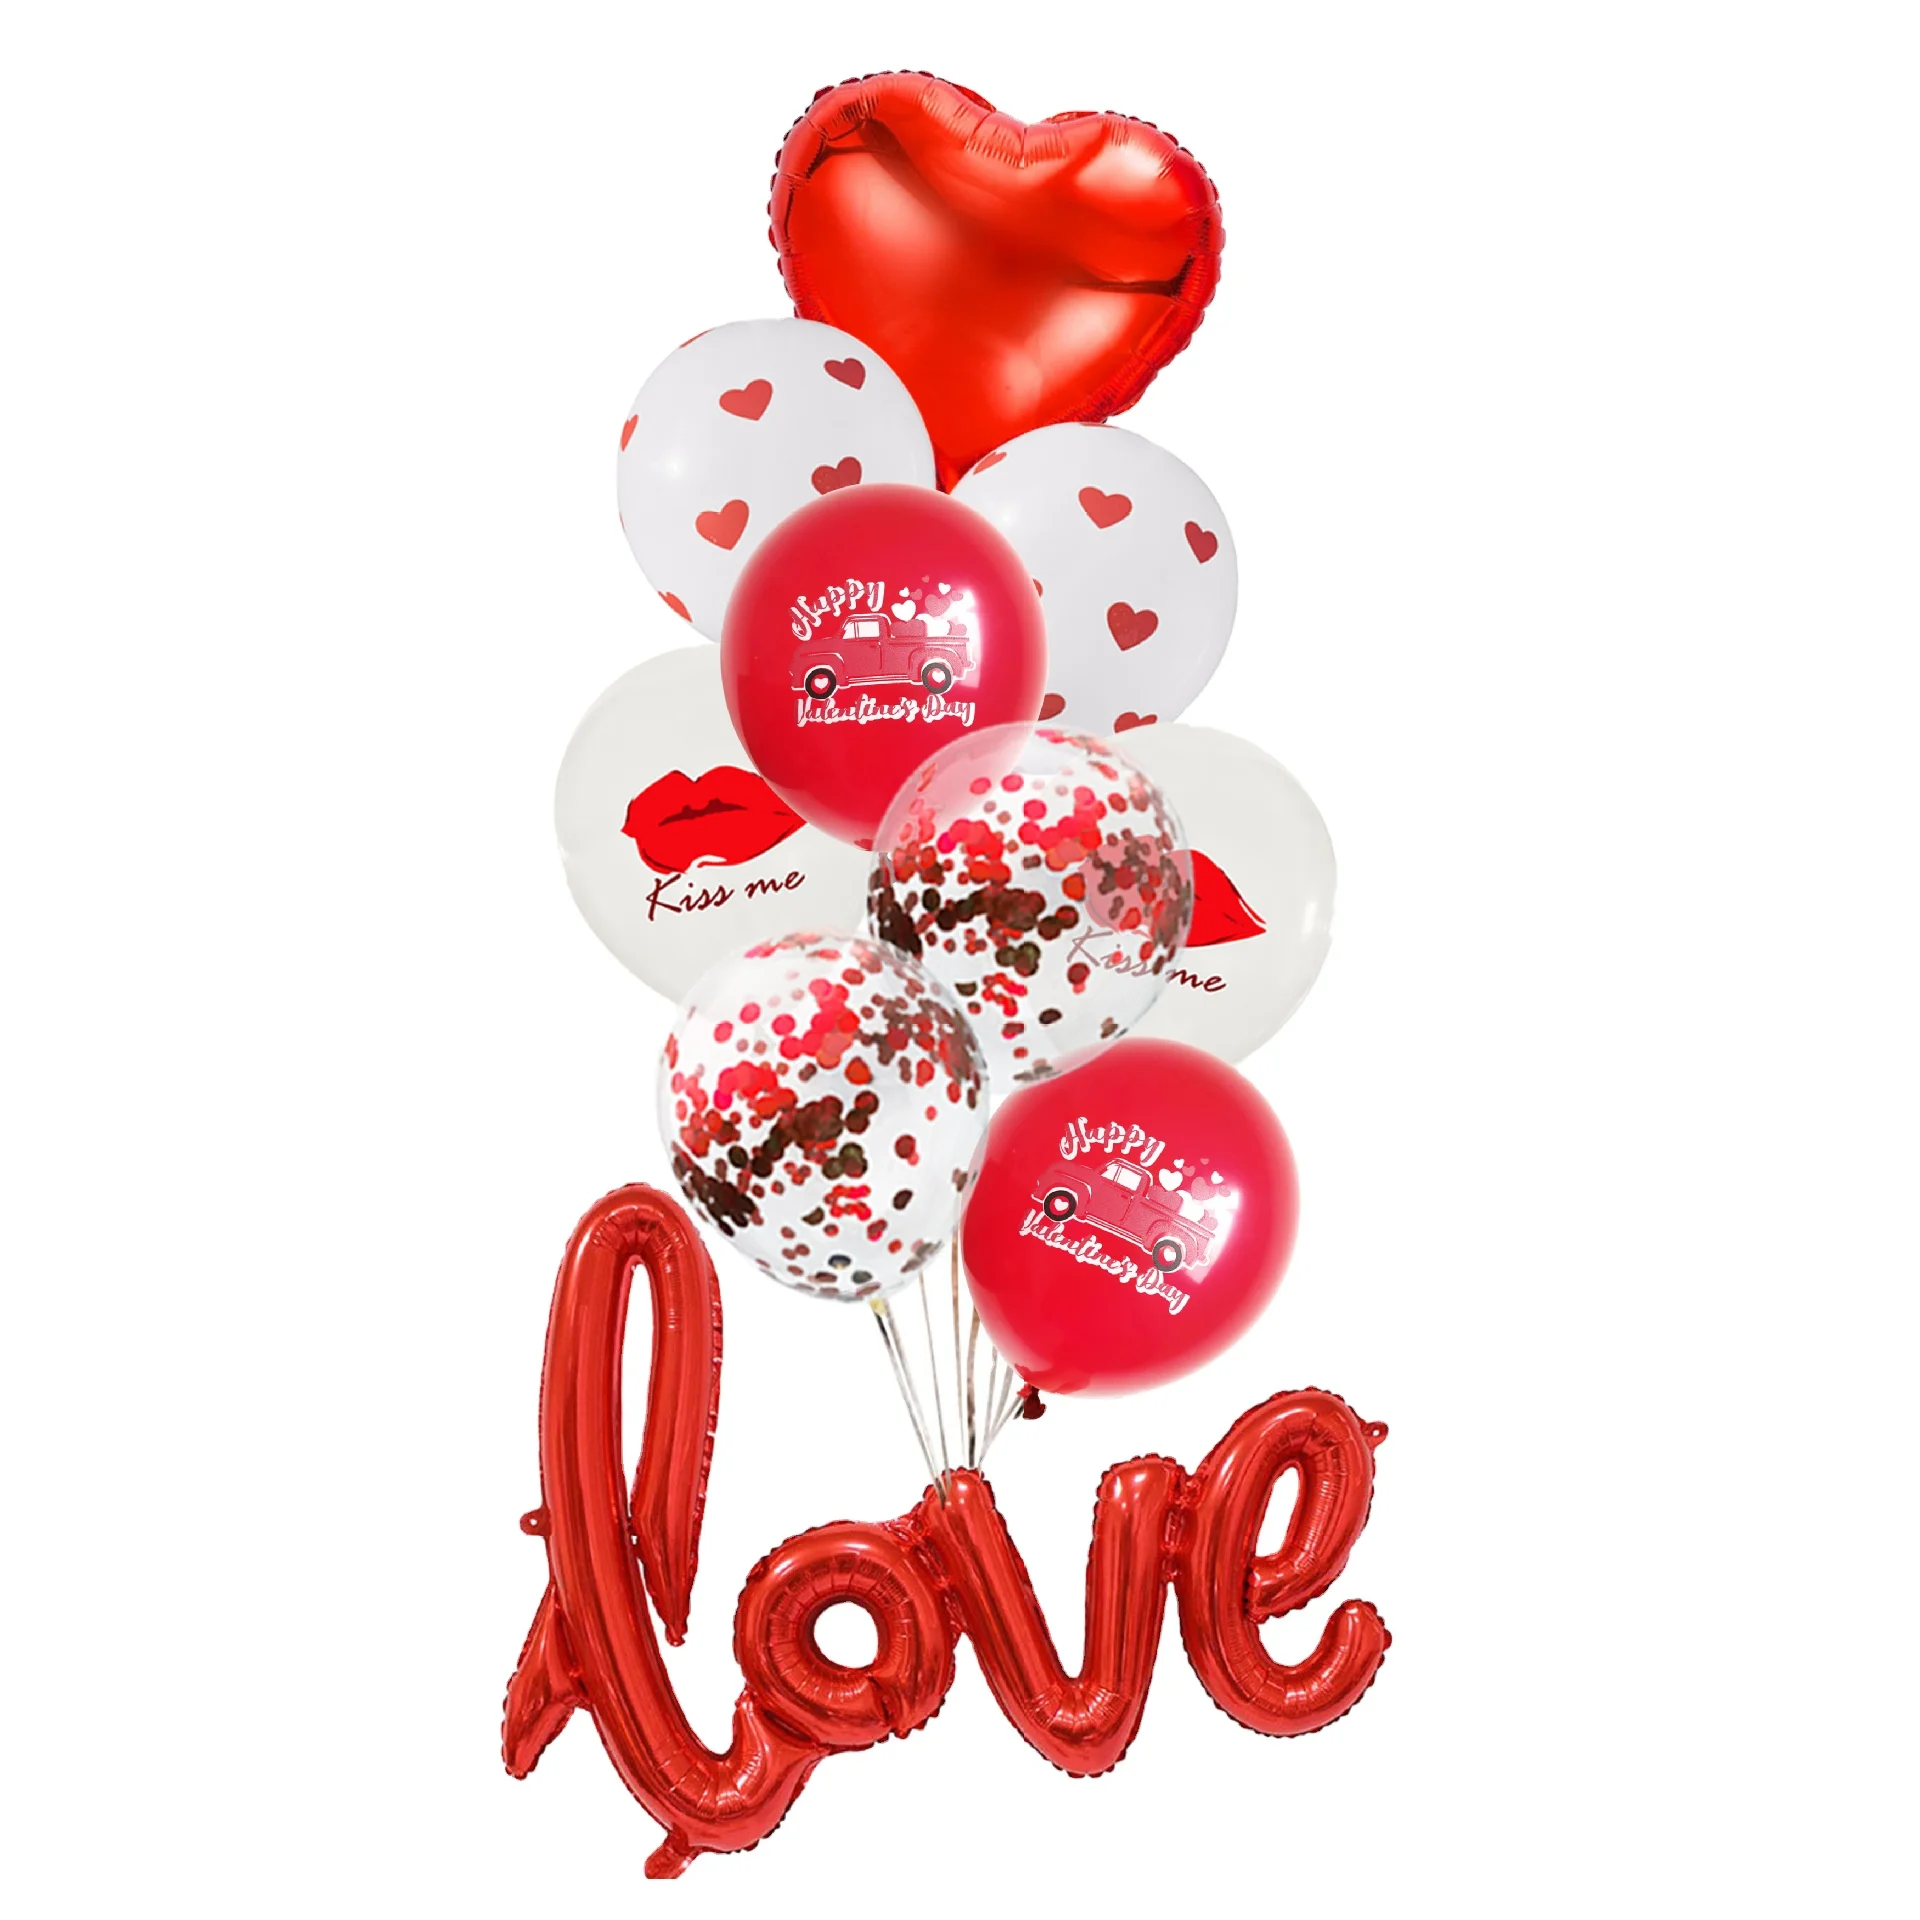 

valentines day party heart shape foil letter balloon 12 inch confetti ballon party decoration red latex arch kit